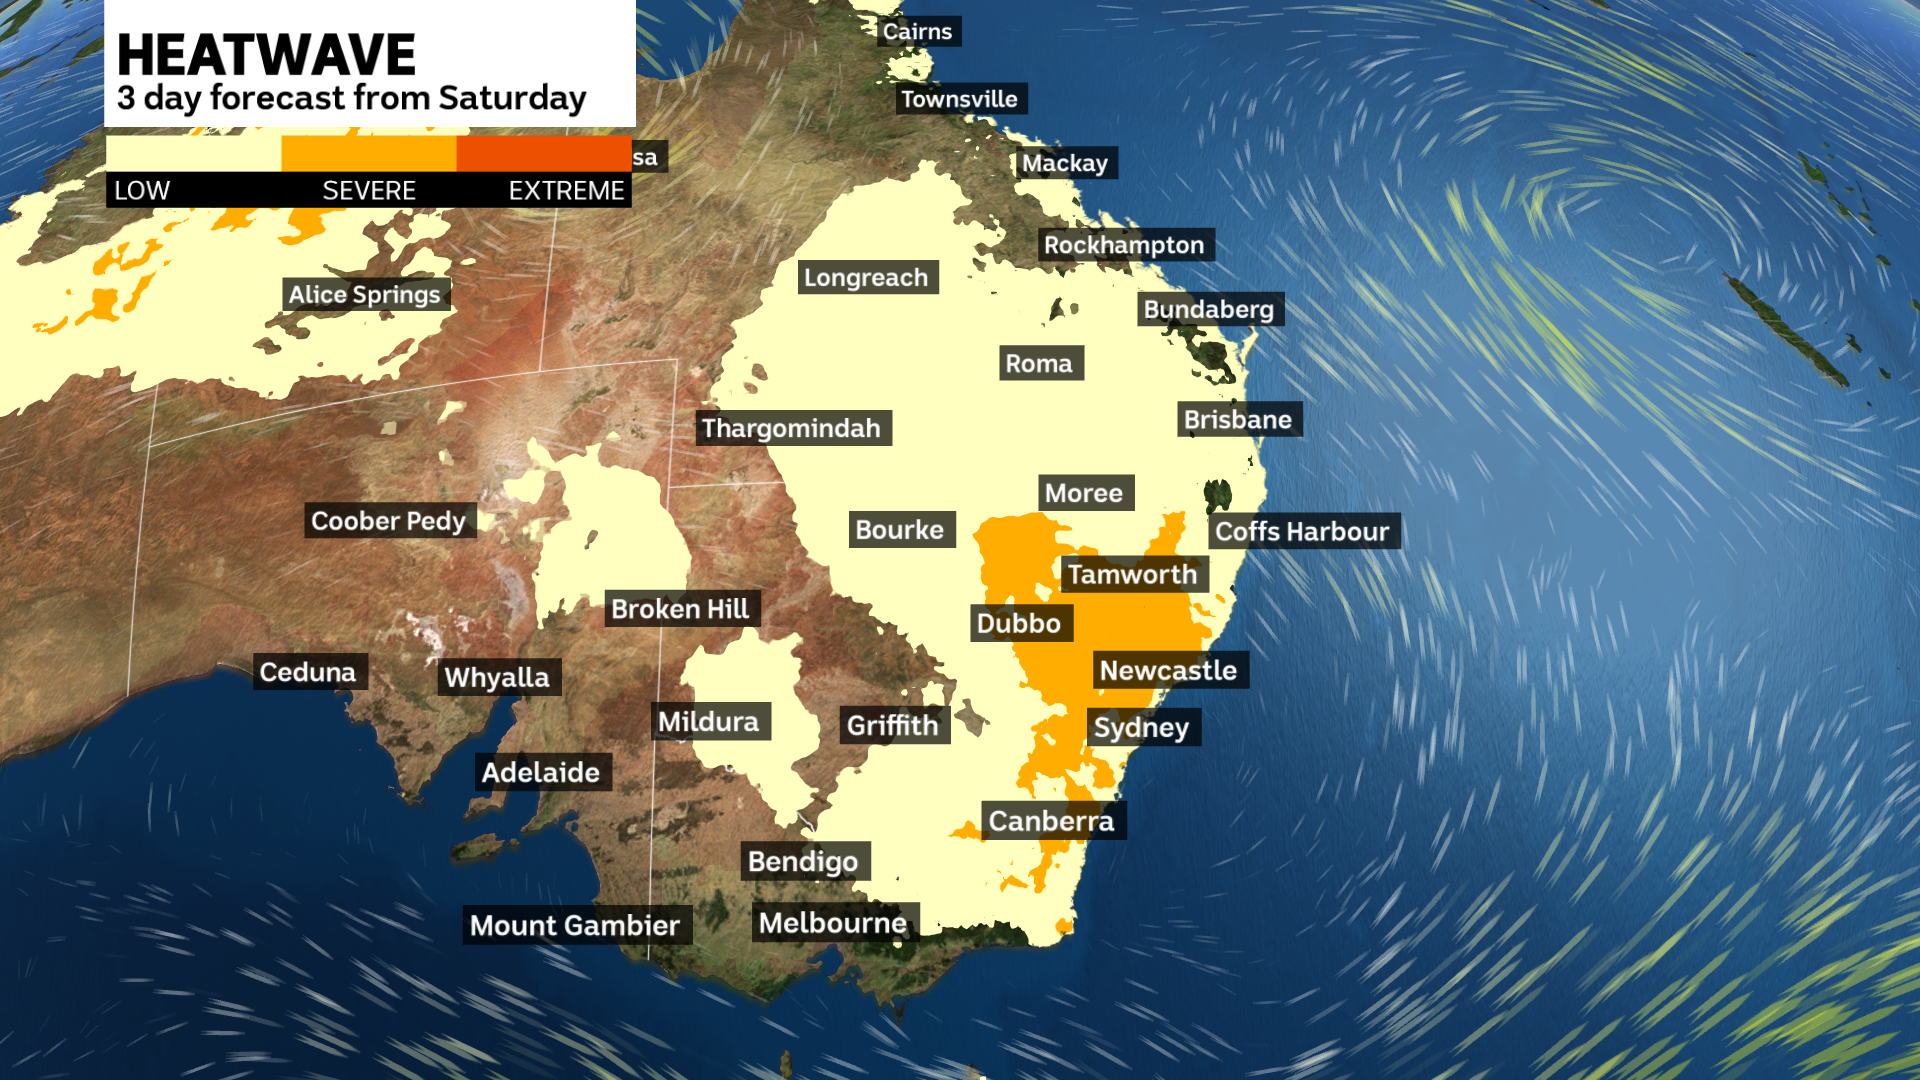 a weather map showing the prediction of a heatwave for eastern Australia